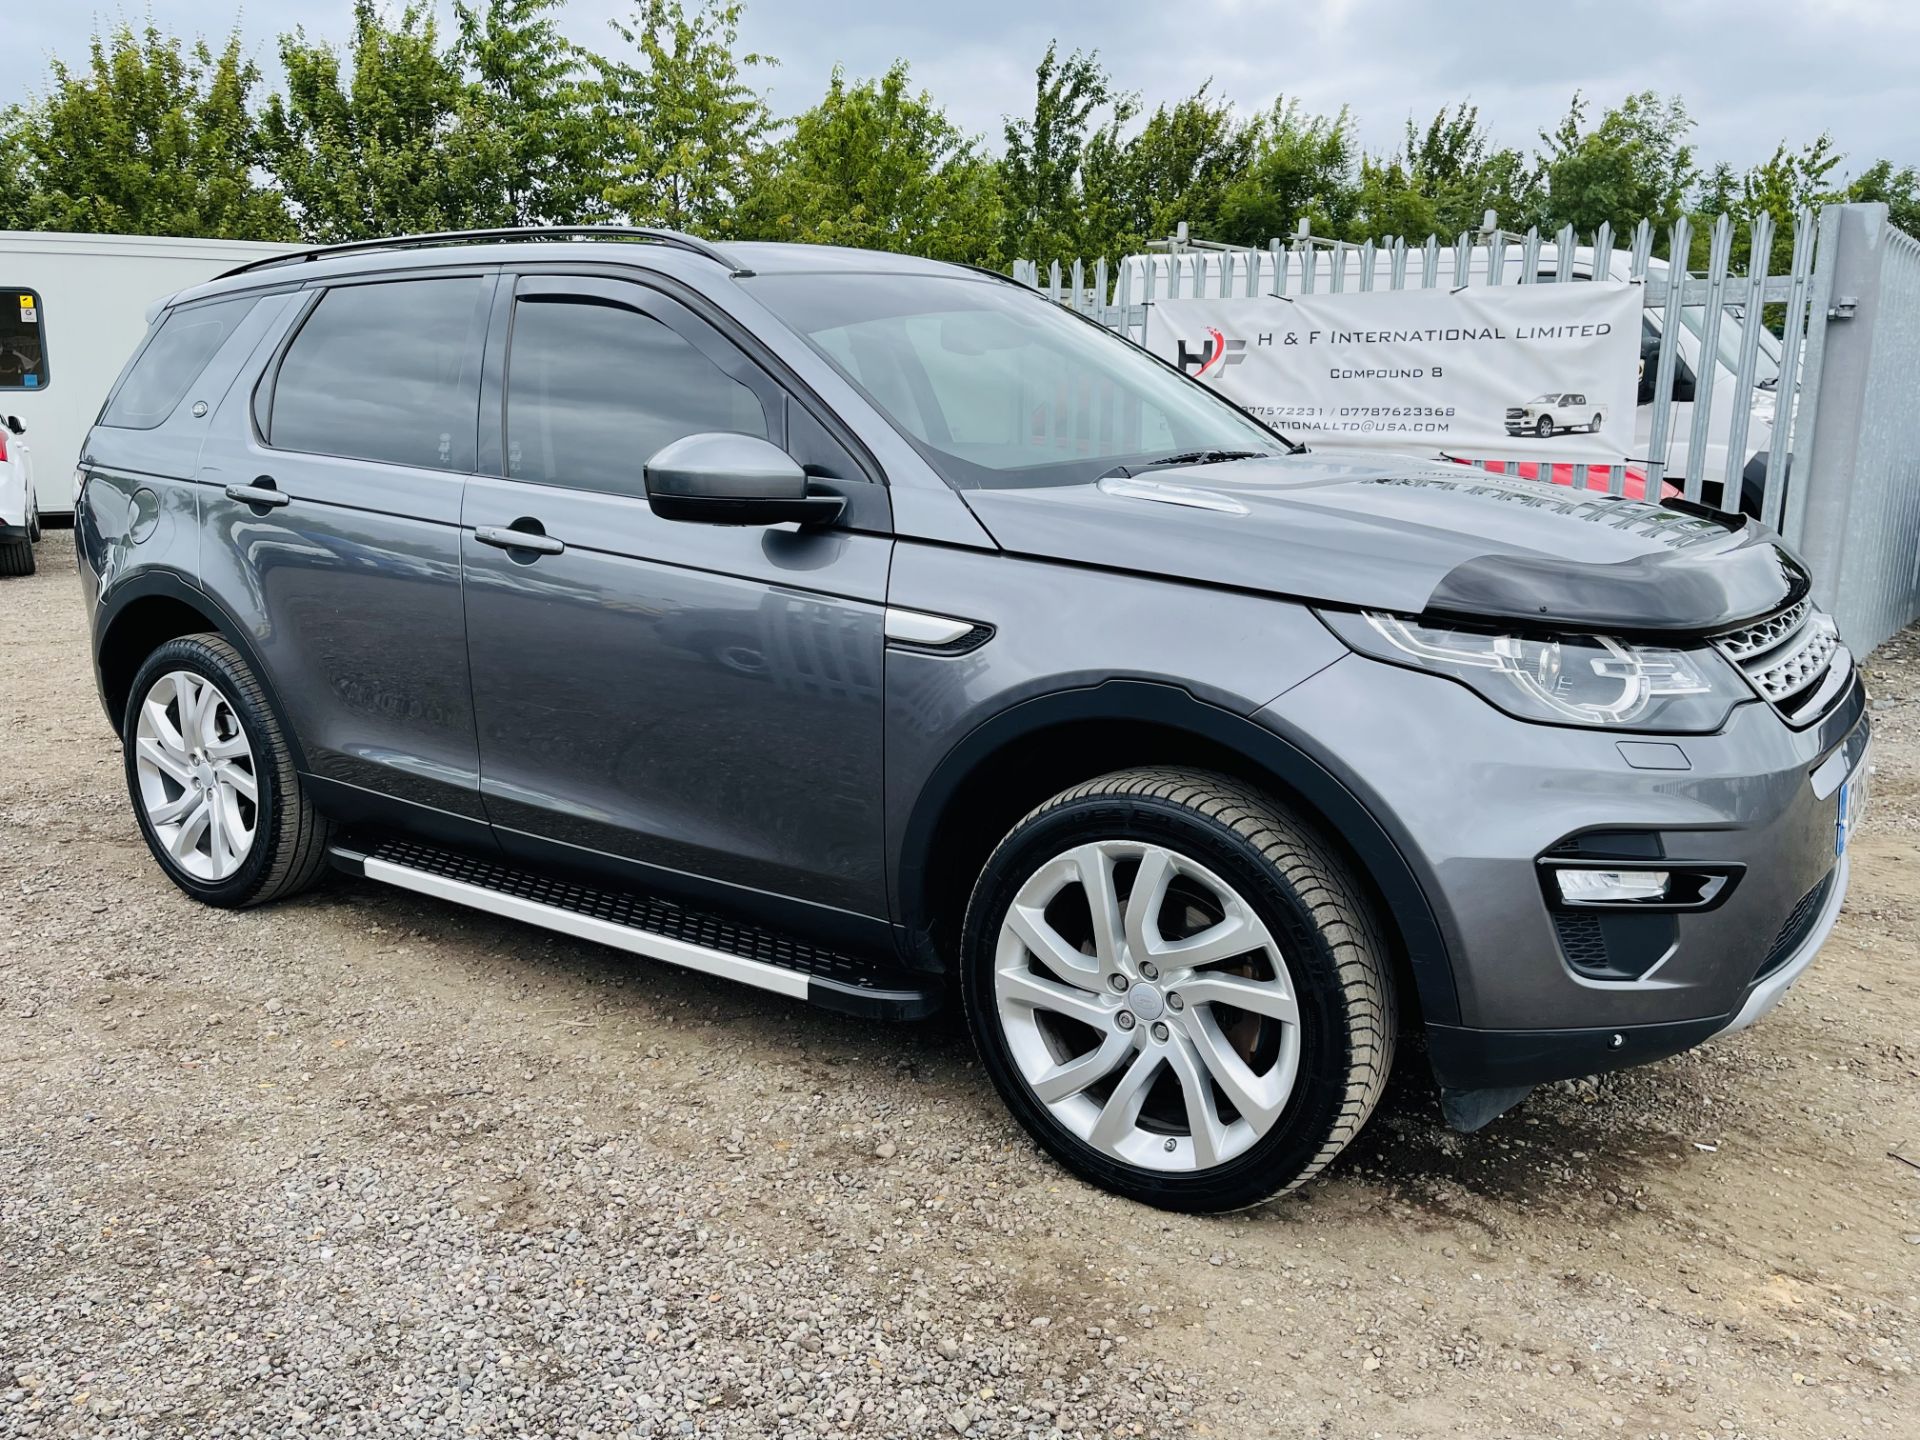 ** ON SALE **Land Rover Discovery sport 2.0 TD4 HSE 2016 '16 Reg' 7 seats - Sat Nav - Euro 6 - - Image 23 of 35